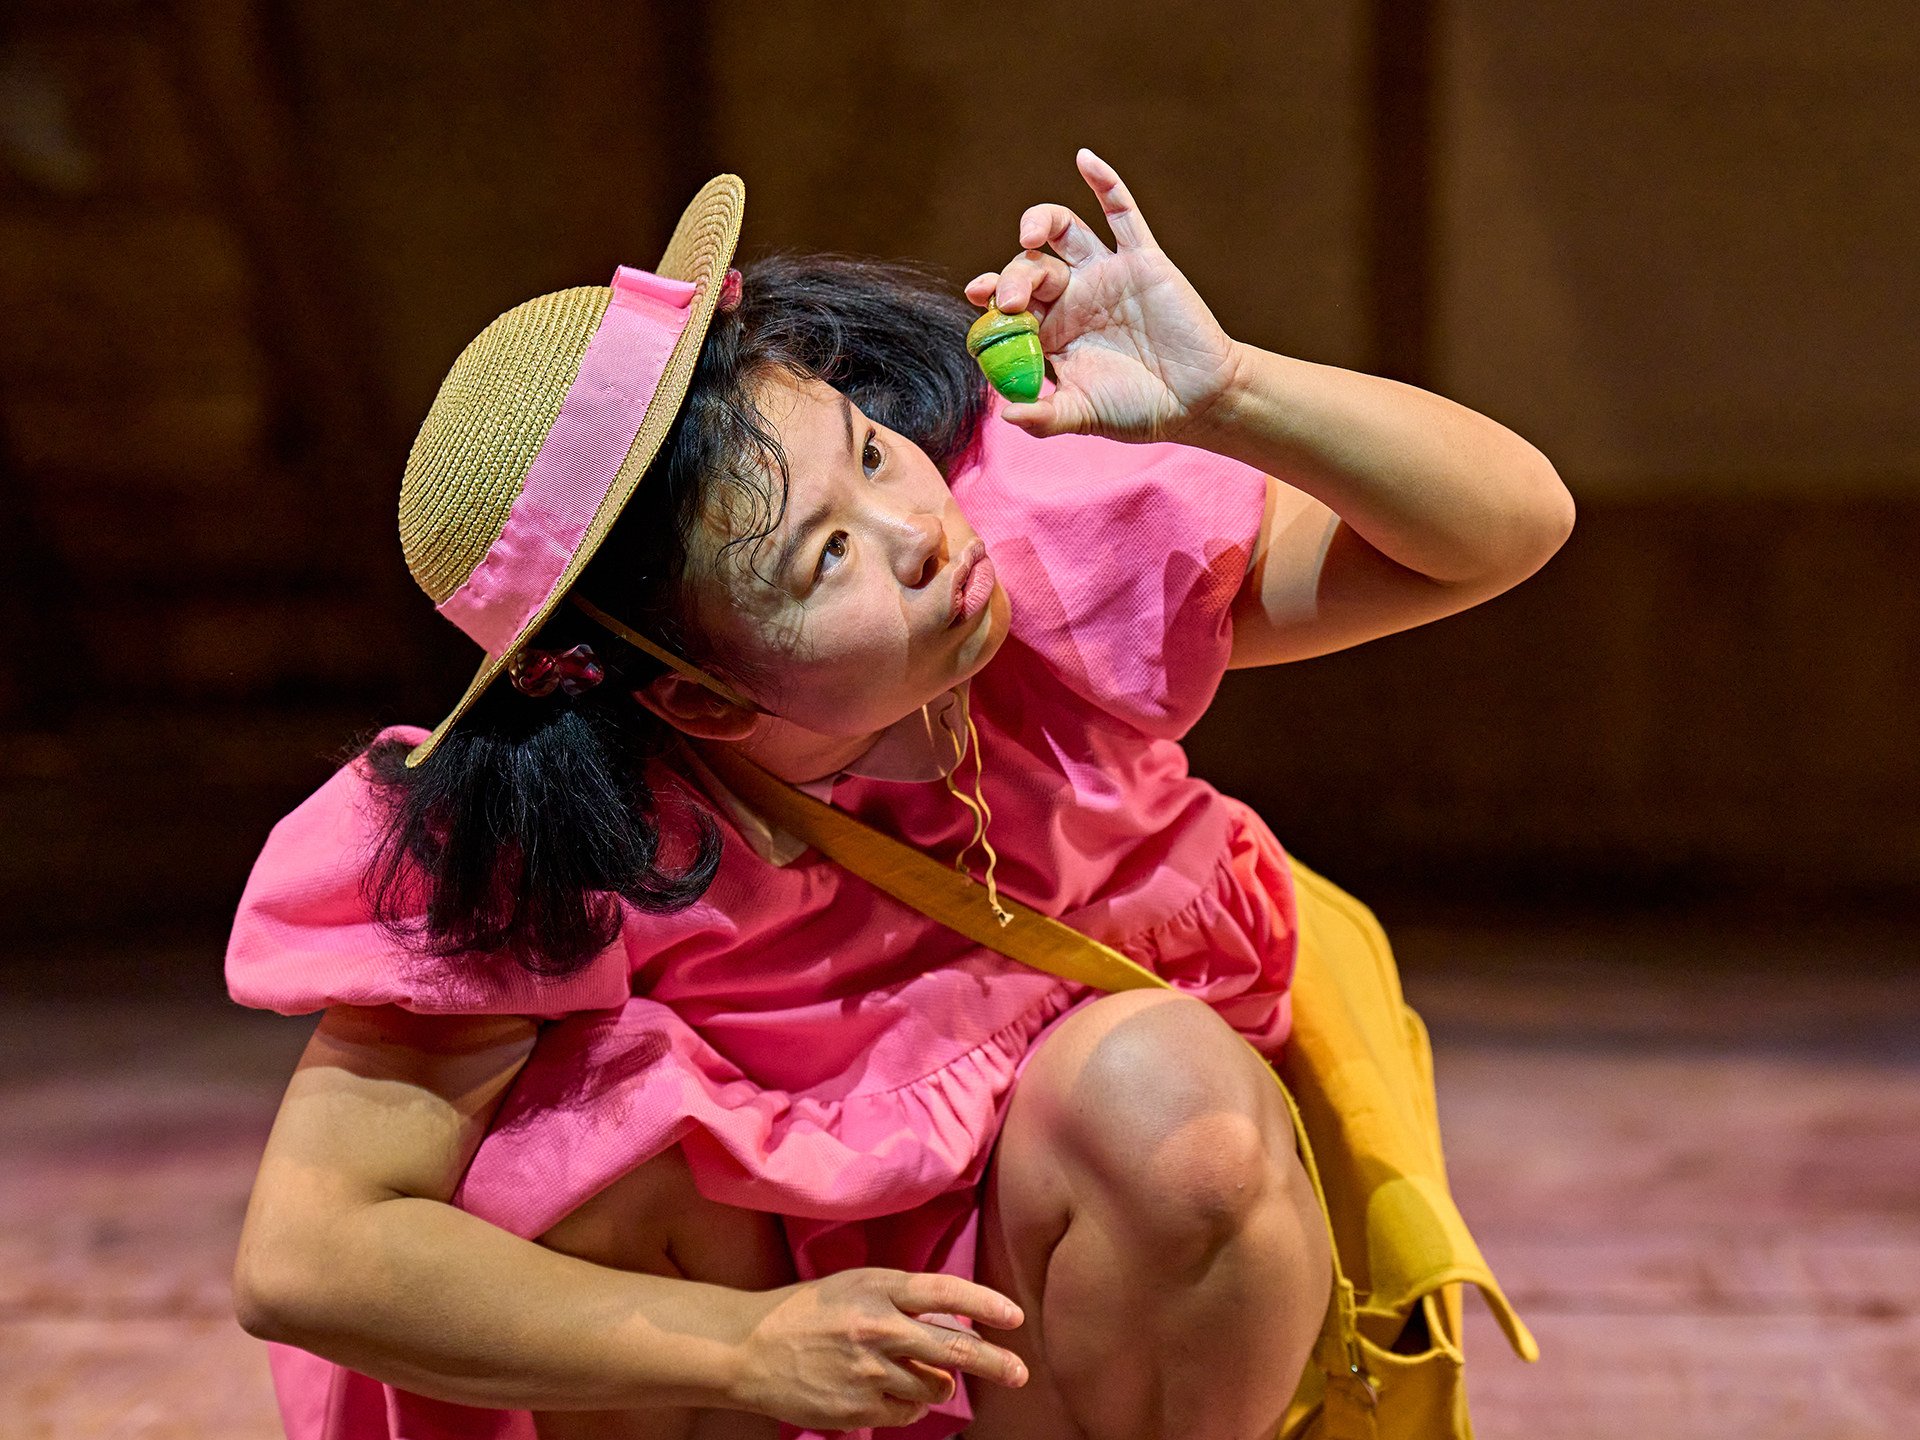 Mei Mac in a scene from the Royal Shakespeare Company’s  “My Neighbour Totoro” stage show. The actress, born in Britain to a Hong Kong immigrant family, became the first East Asian nominated for an Olivier Award for her role. Photo: Twitter/@totoro_show